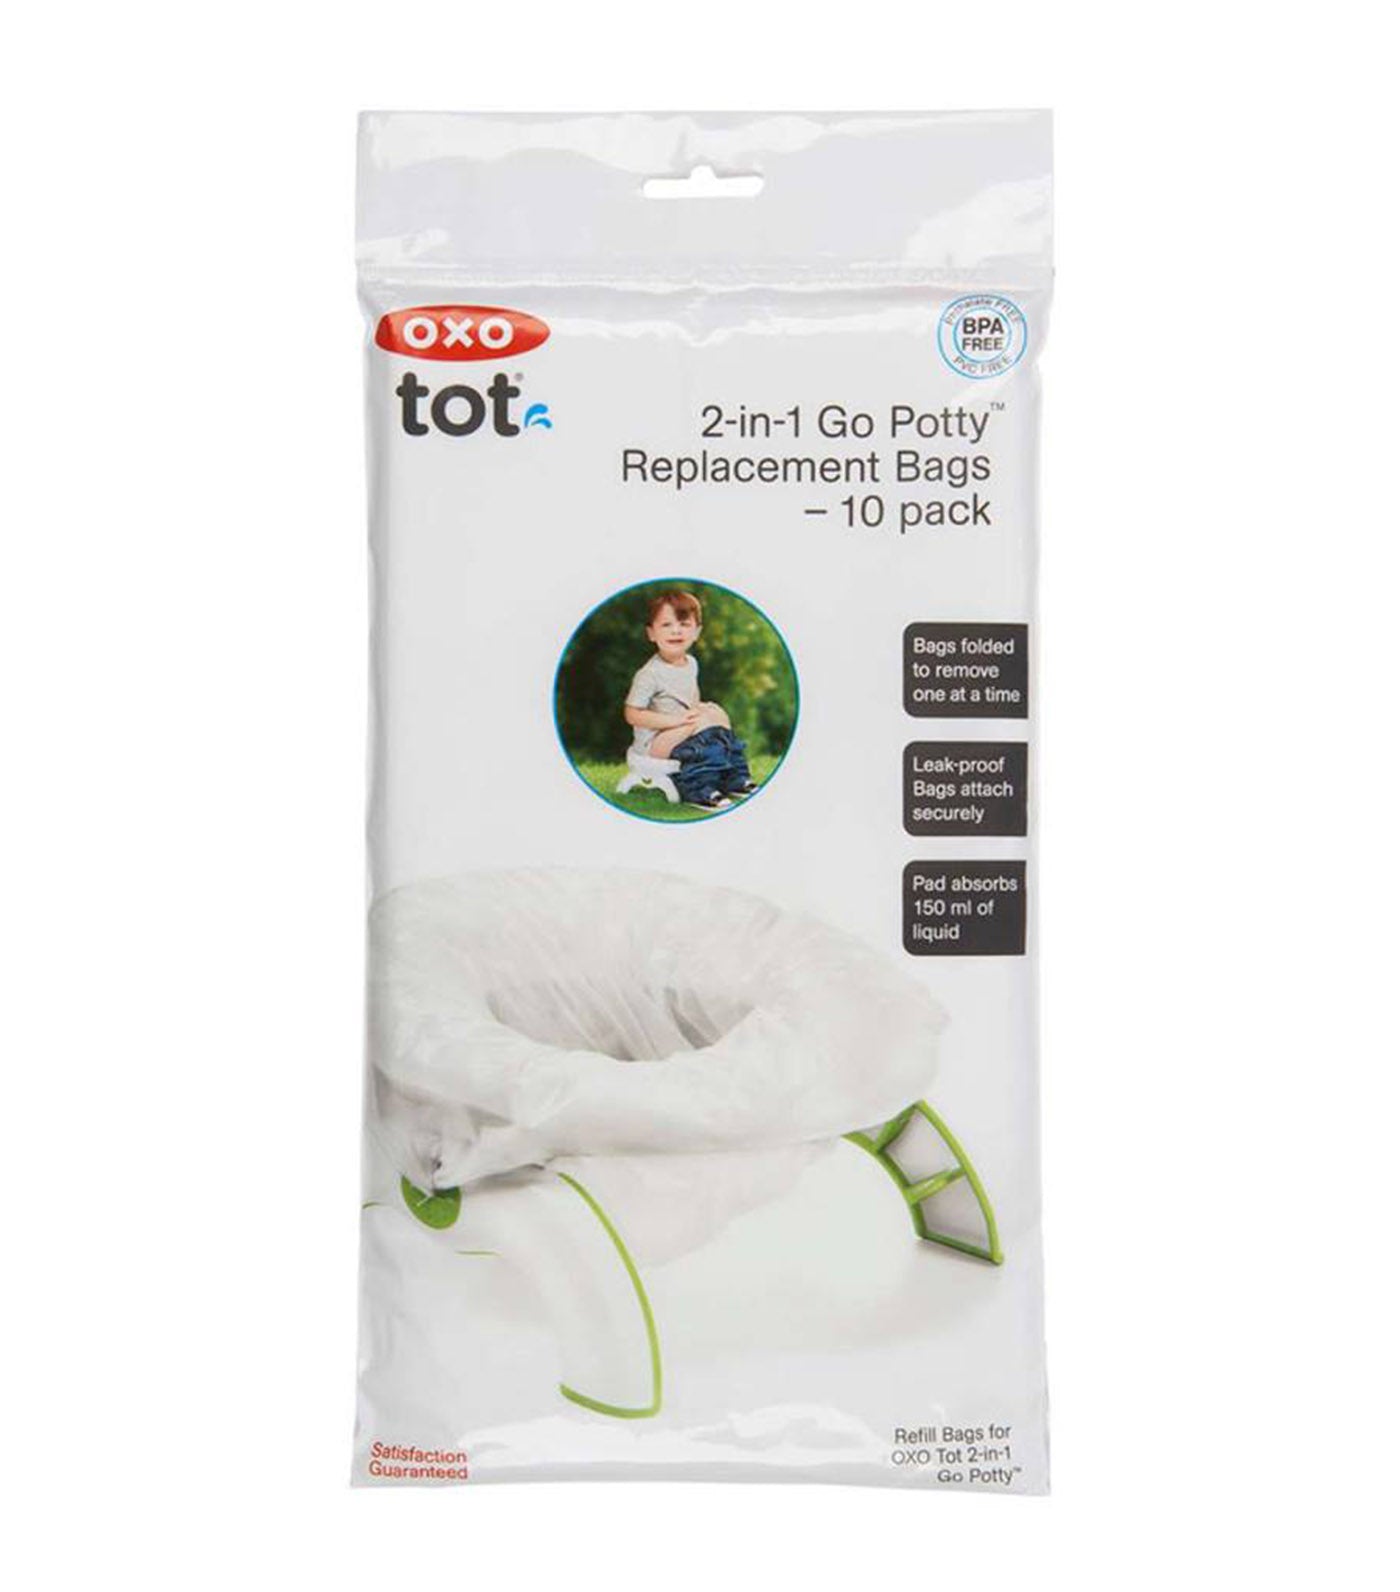 oxo tot 2-in-1 go potty replacement bags - 10 count